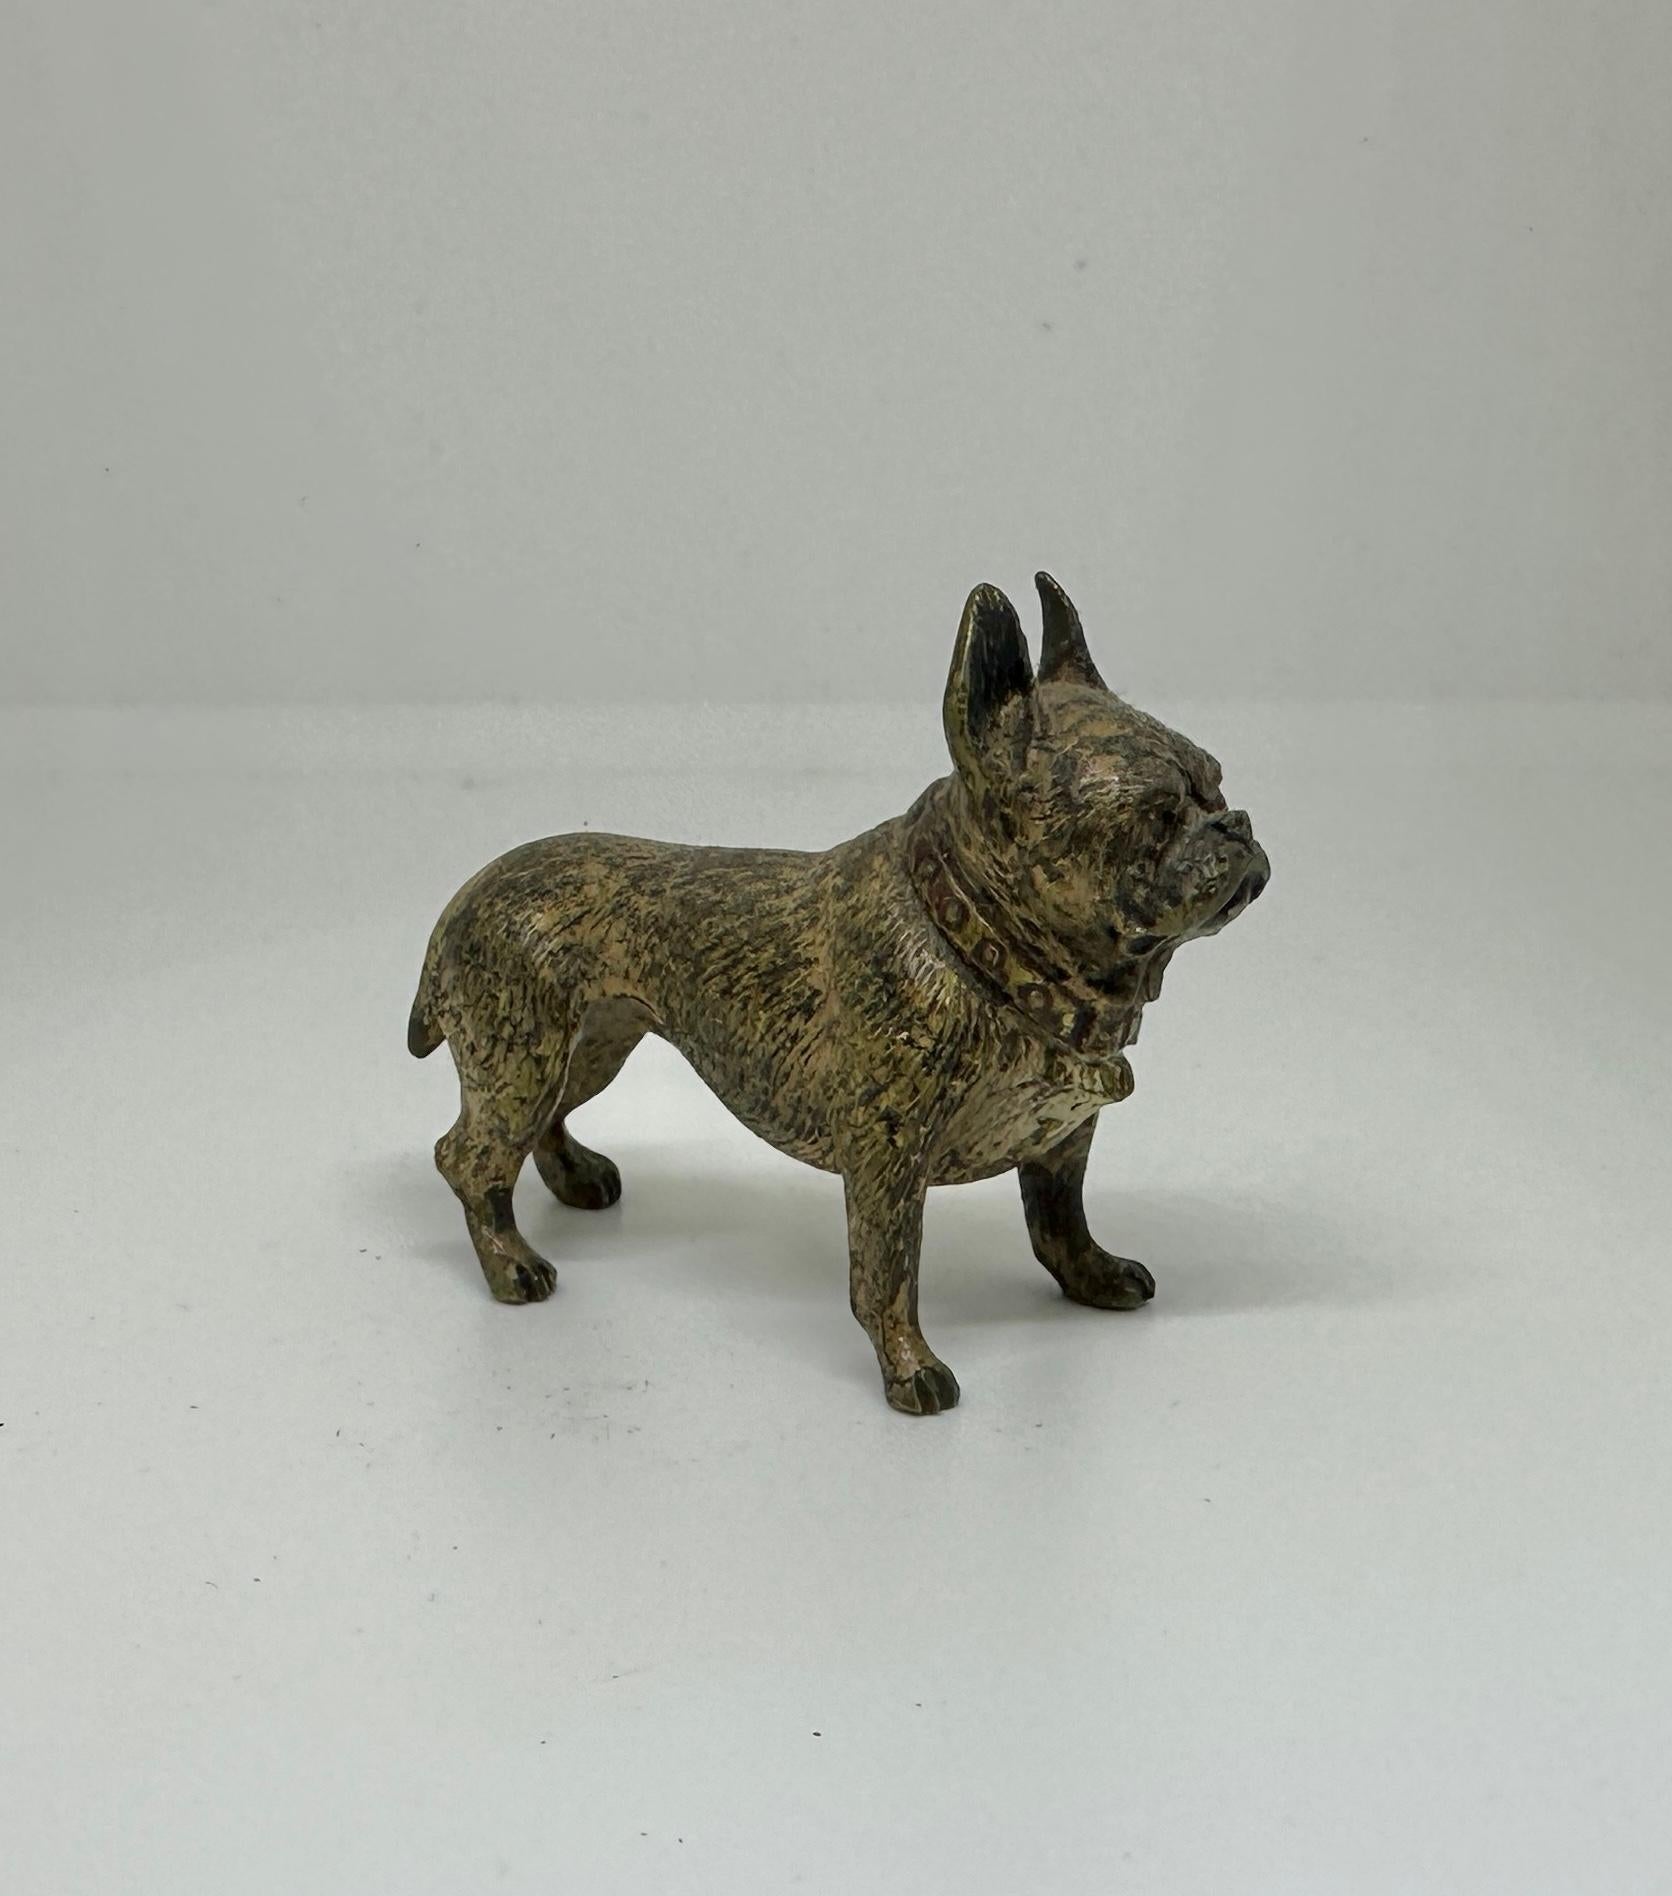 THIS IS A SUPERB ANTIQUE AUSTRIAN VIENNA BRONZE OF A FRENCH BULLDOG 